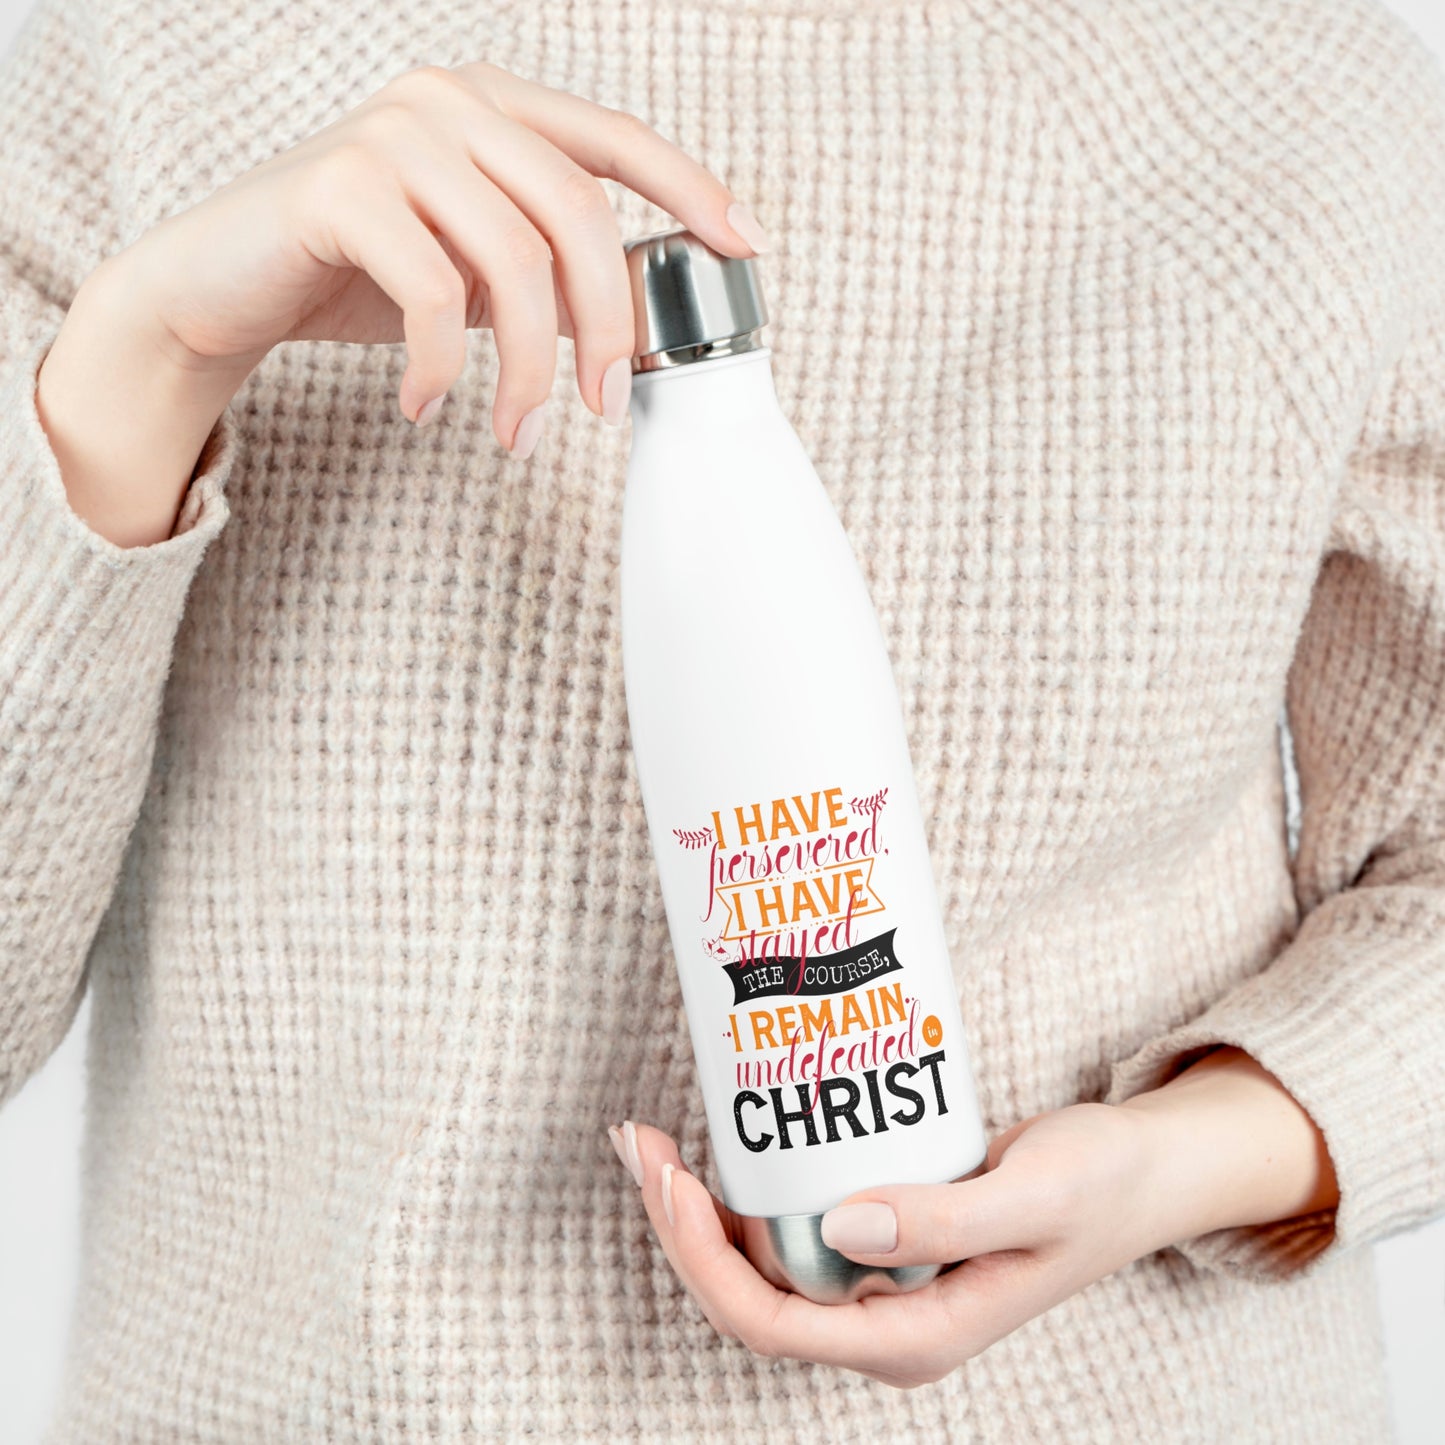 I Have Persevered I Have Stayed The Course I Remain Undefeated In Christ Insulated Bottle